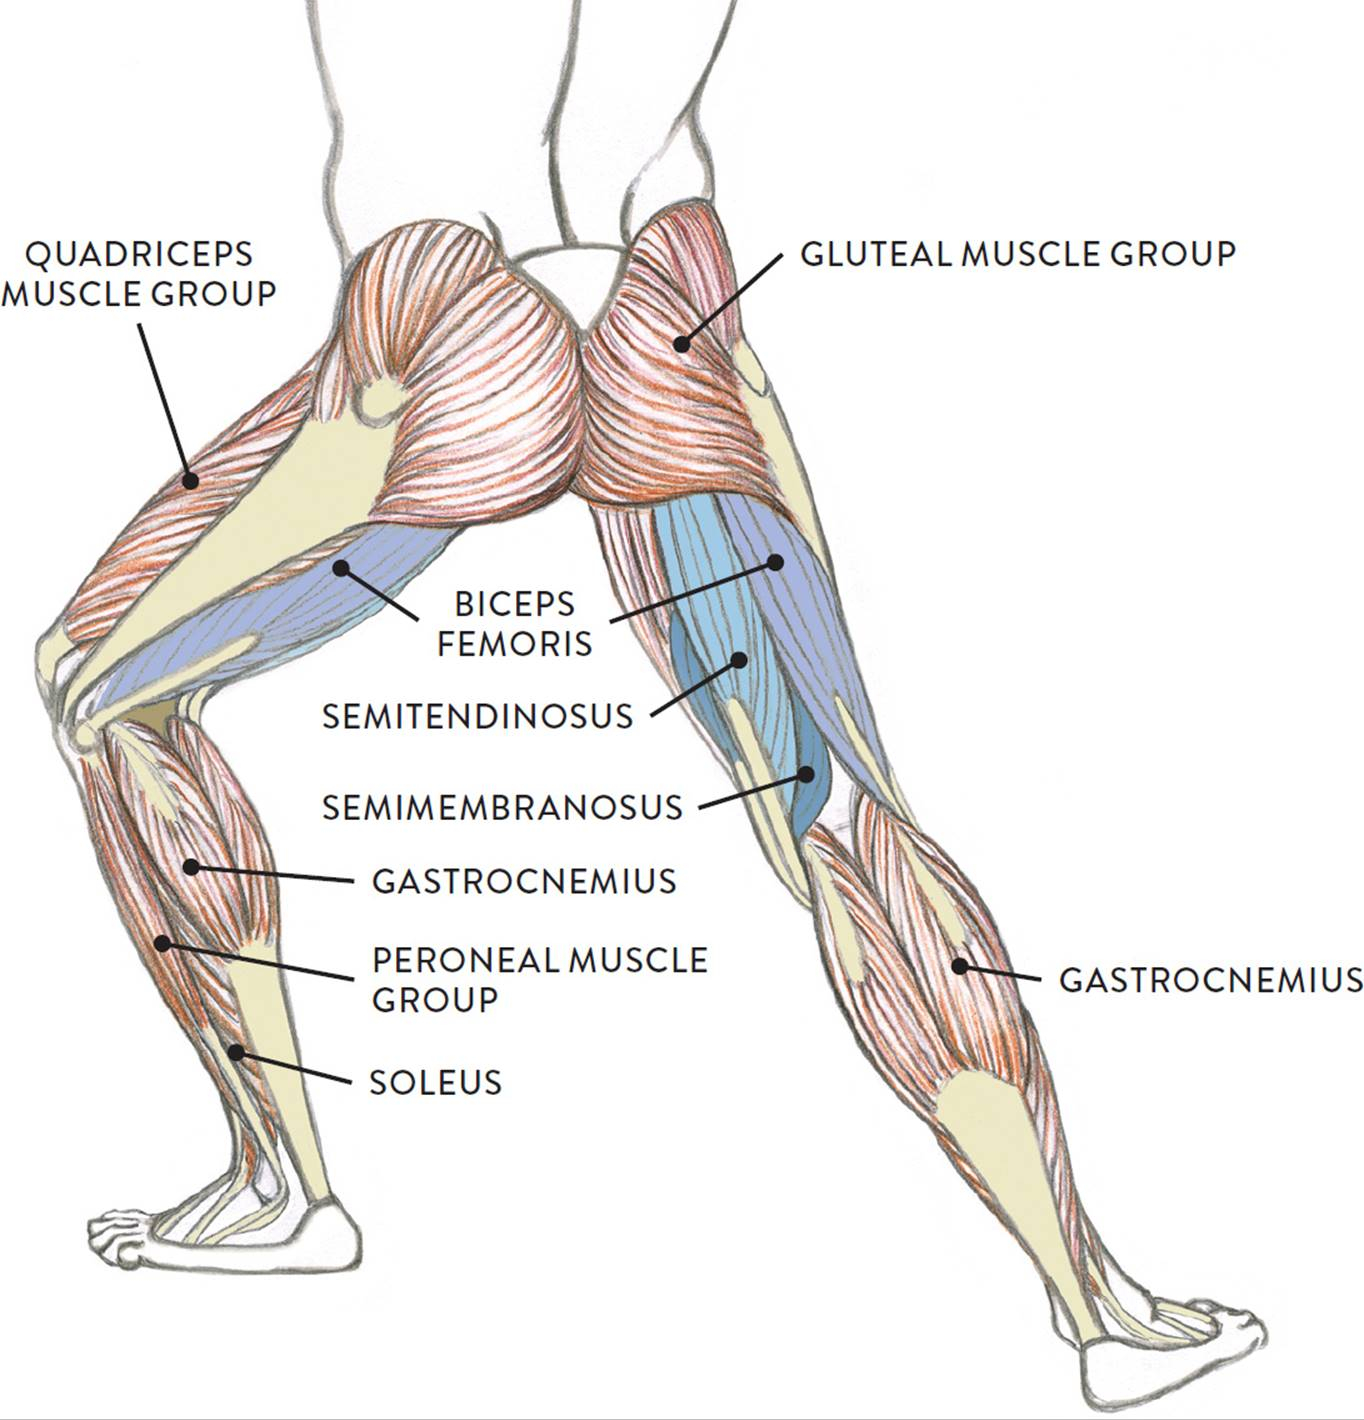 Leg Muscles Diagram Muscles Of The Leg And Foot Classic Human Anatomy In Motion The